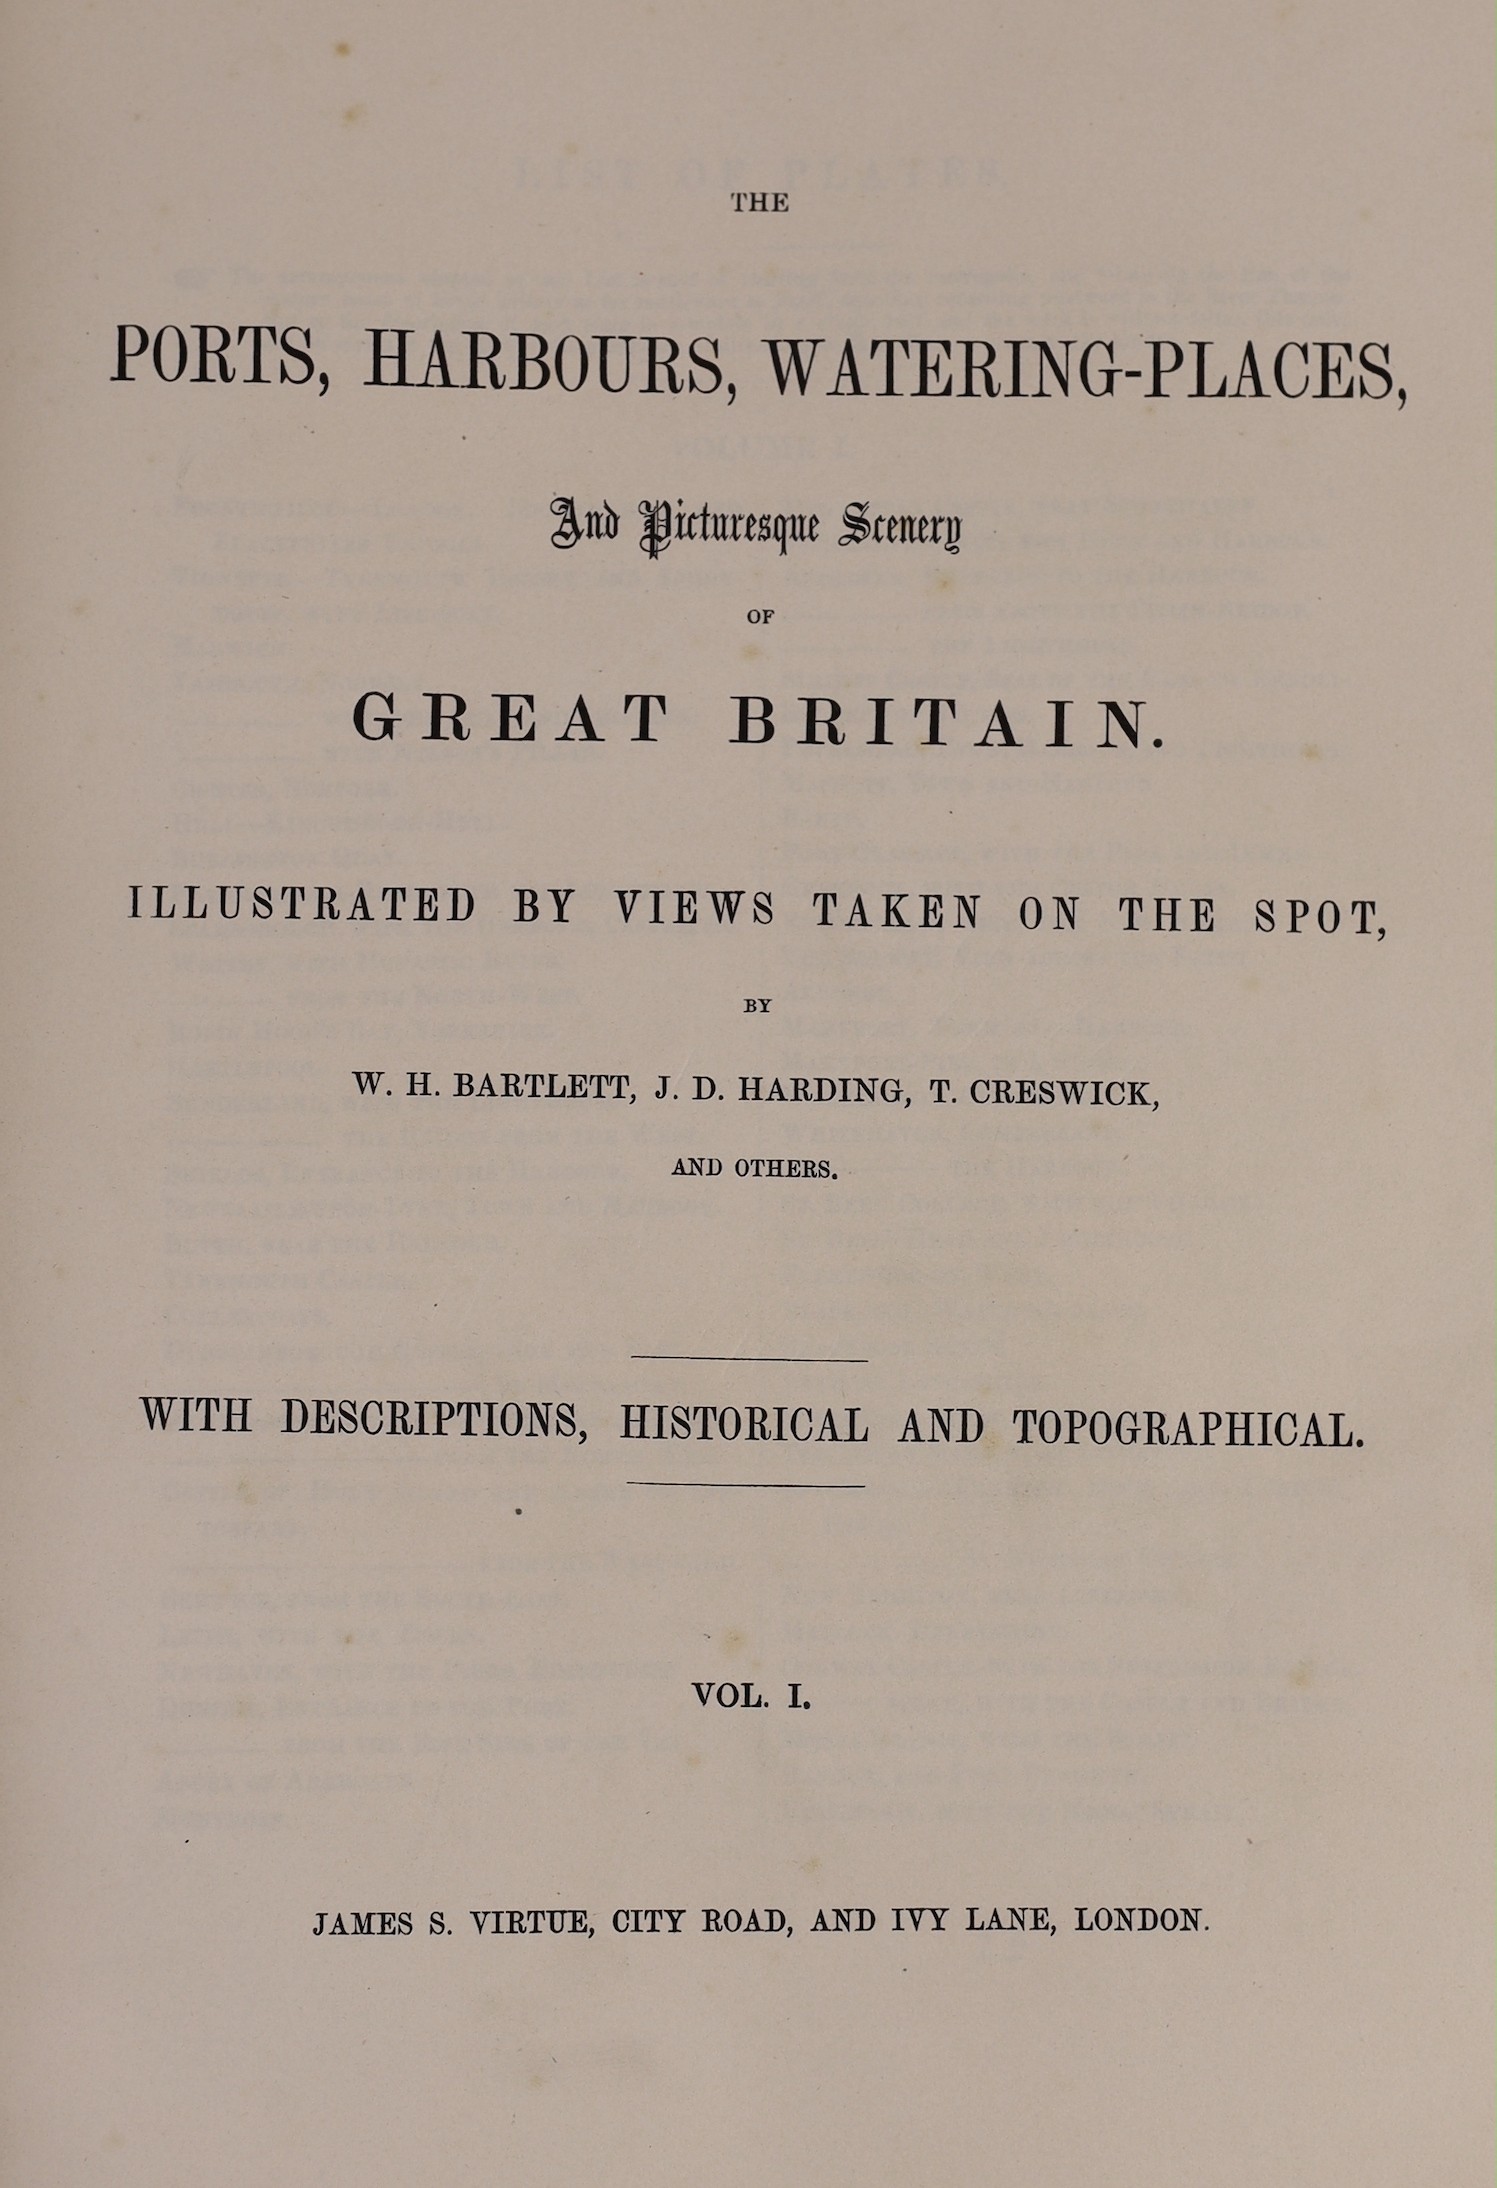 Finden, William - Views of Ports, Harbours & Watering Places of Great Britain, illustrated by W.H. Bartlett, 2 vols, illustrated by W.H. Bartlett et al, with engraved titles and 123 plates, 4to, contemporary half calf, J